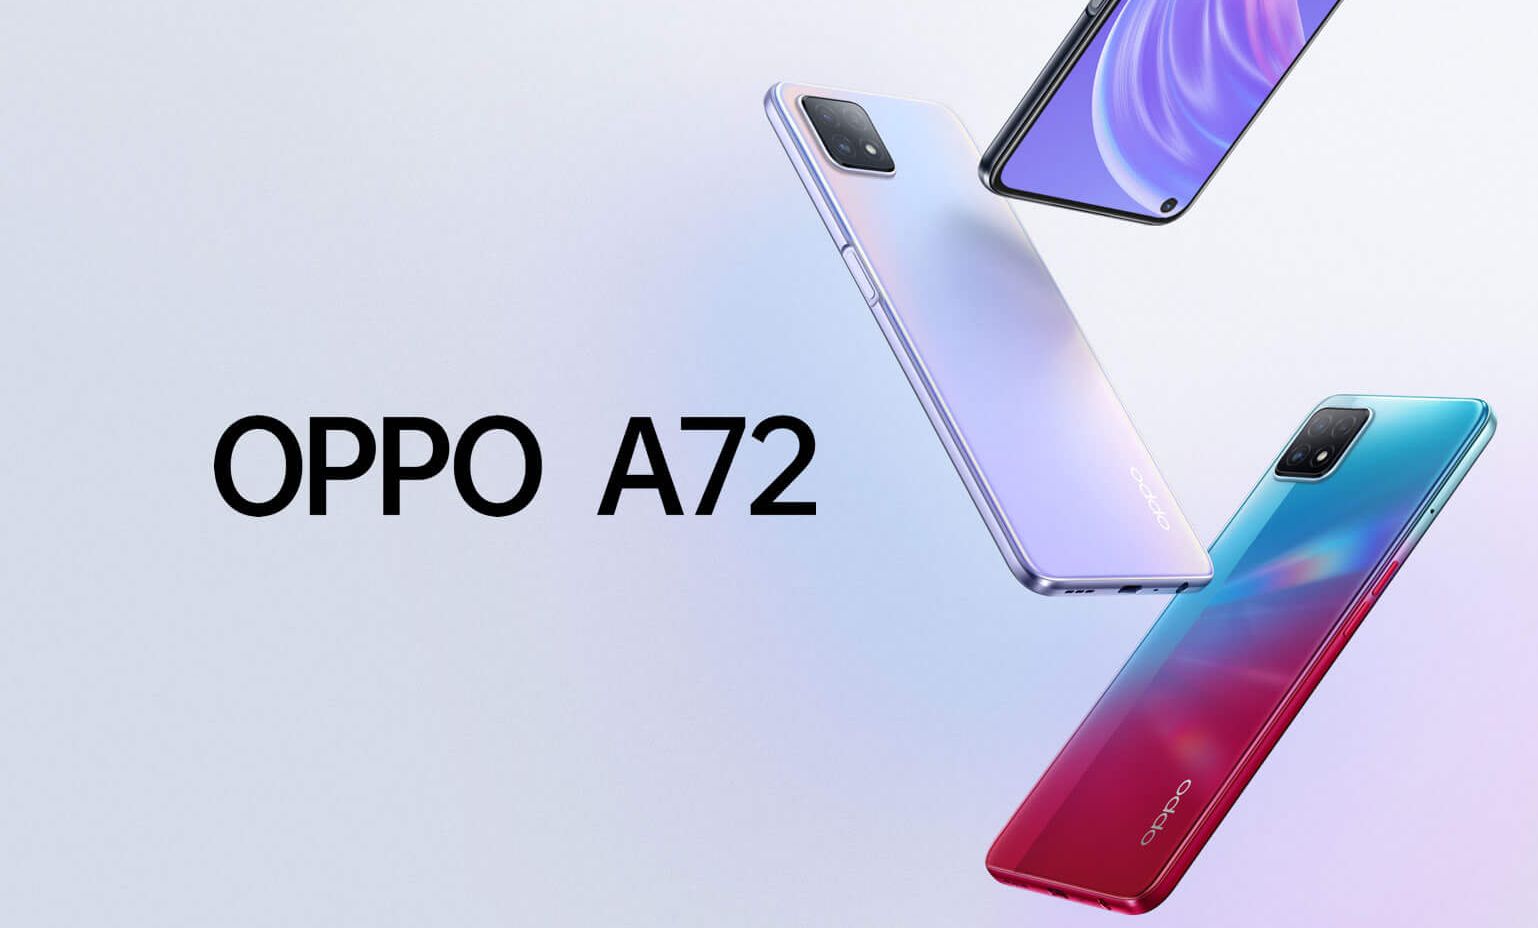 OPPO A72 5G with Dimensity 720, 90Hz screen, 16MP triple cameras launched for 1,899 Yuan (~$270)